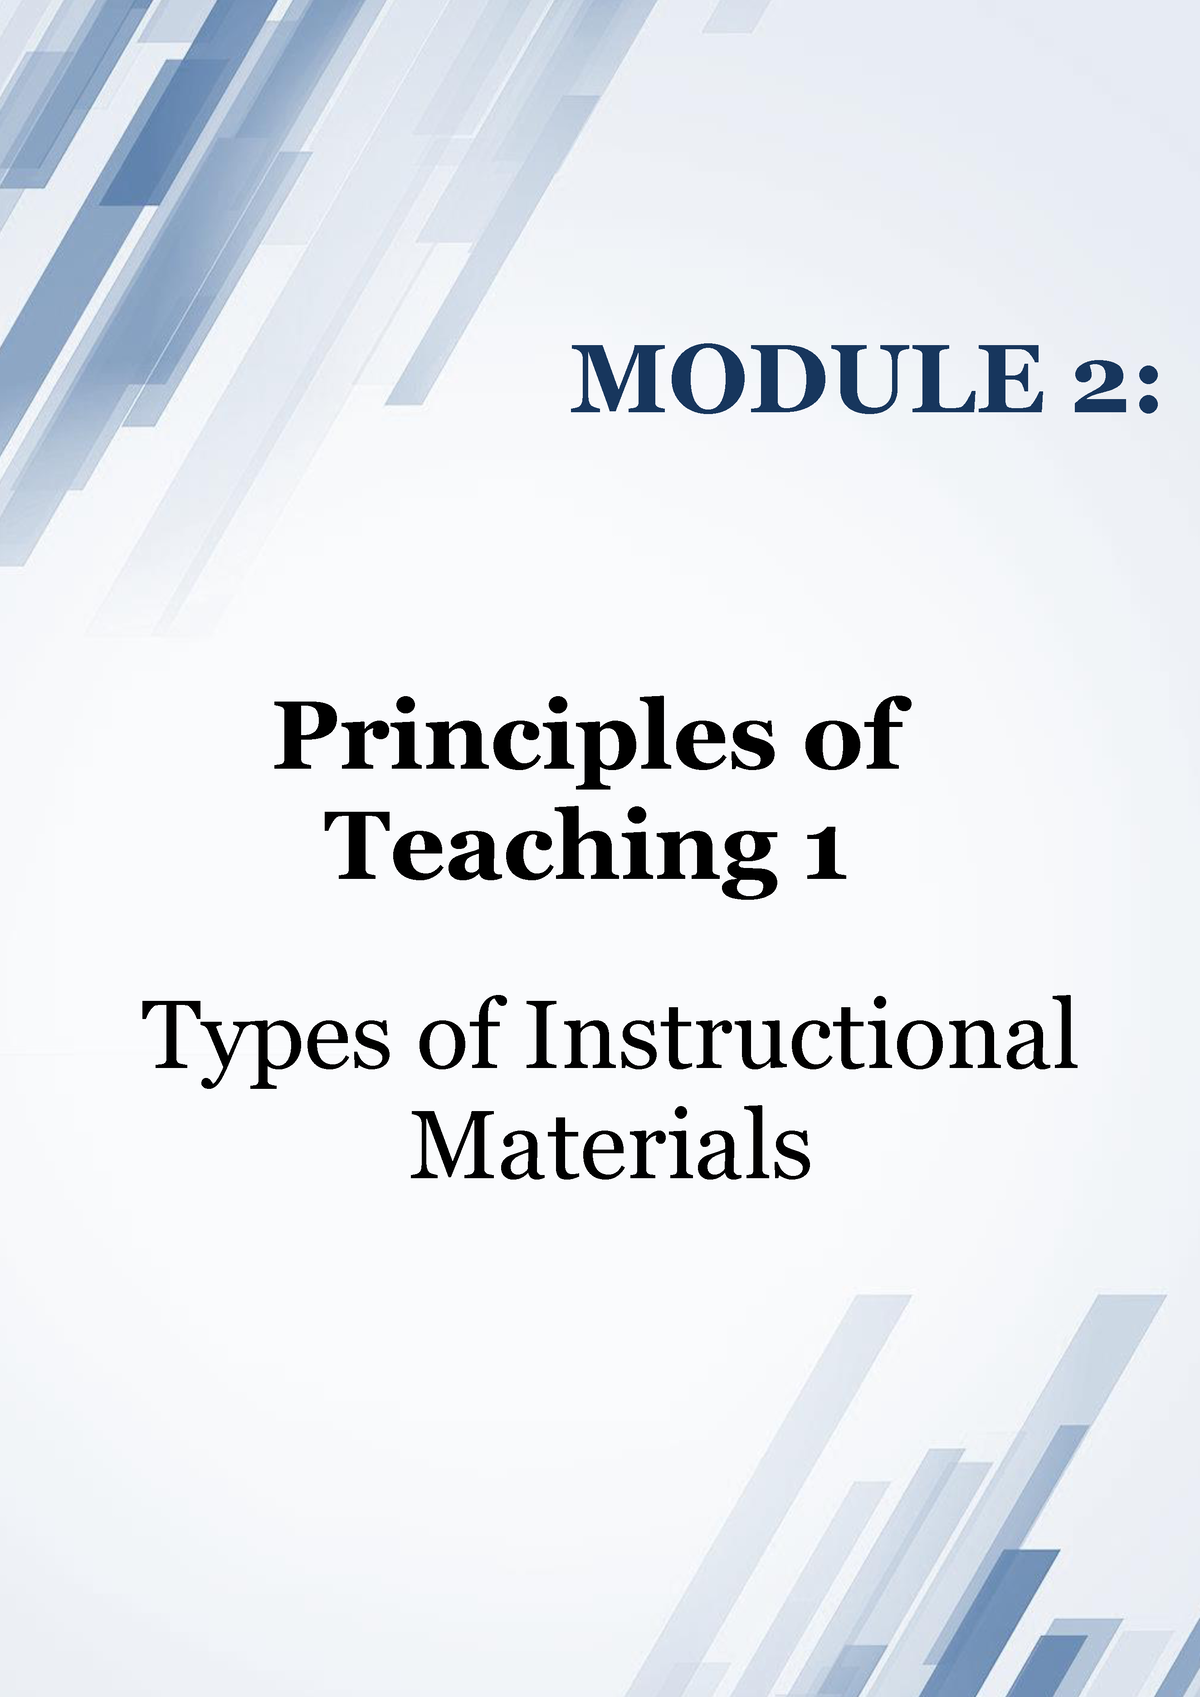 Instructional Materials Module Module 2 Principles Of Teaching 1 Types Of Instructional 5988